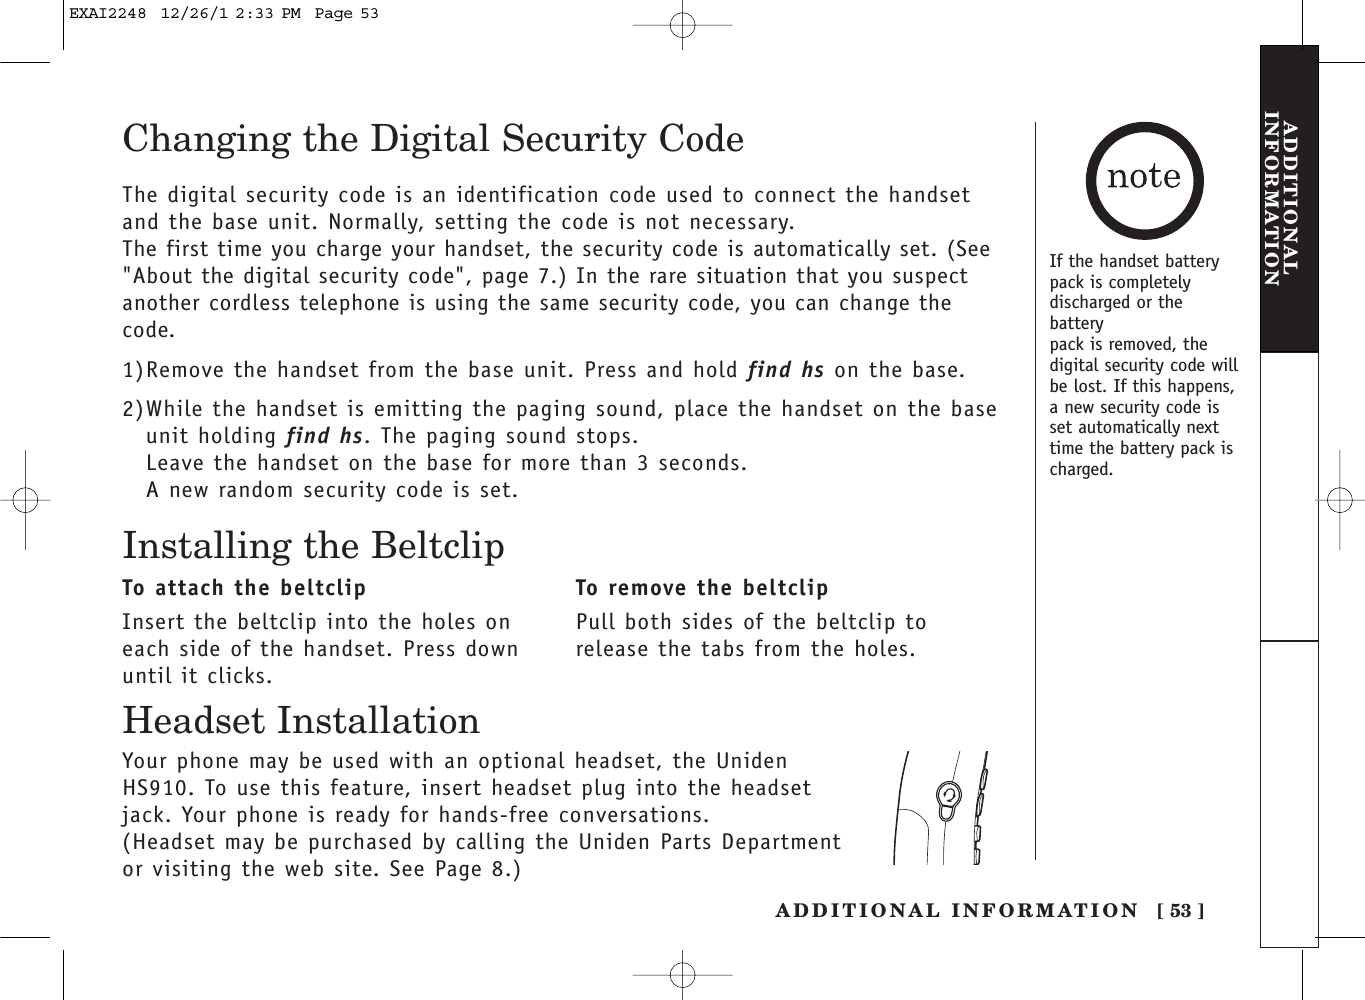 [ 53 ]ADDITIONAL INFORMATIONADDITIONALINFORMATIONChanging the Digital Security CodeThe digital security code is an identification code used to connect the handsetand the base unit. Normally, setting the code is not necessary.The first time you charge your handset, the security code is automatically set. (See&quot;About the digital security code&quot;, page 7.) In the rare situation that you suspectanother cordless telephone is using the same security code, you can change thecode.1)Remove the handset from the base unit. Press and hold find hs on the base.2)While the handset is emitting the paging sound, place the handset on the baseunit holding find hs. The paging sound stops.Leave the handset on the base for more than 3 seconds.A new random security code is set.Installing the BeltclipTo attach the beltclipInsert the beltclip into the holes oneach side of the handset. Press downuntil it clicks.To remove the beltclipPull both sides of the beltclip torelease the tabs from the holes.Your phone may be used with an optional headset, the UnidenHS910. To use this feature, insert headset plug into the headsetjack. Your phone is ready for hands-free conversations.(Headset may be purchased by calling the Uniden Parts Departmentor visiting the web site. See Page 8.)Headset InstallationIf the handset batterypack is completelydischarged or thebatterypack is removed, thedigital security code willbe lost. If this happens,a new security code isset automatically nexttime the battery pack ischarged.EXAI2248  12/26/1 2:33 PM  Page 53